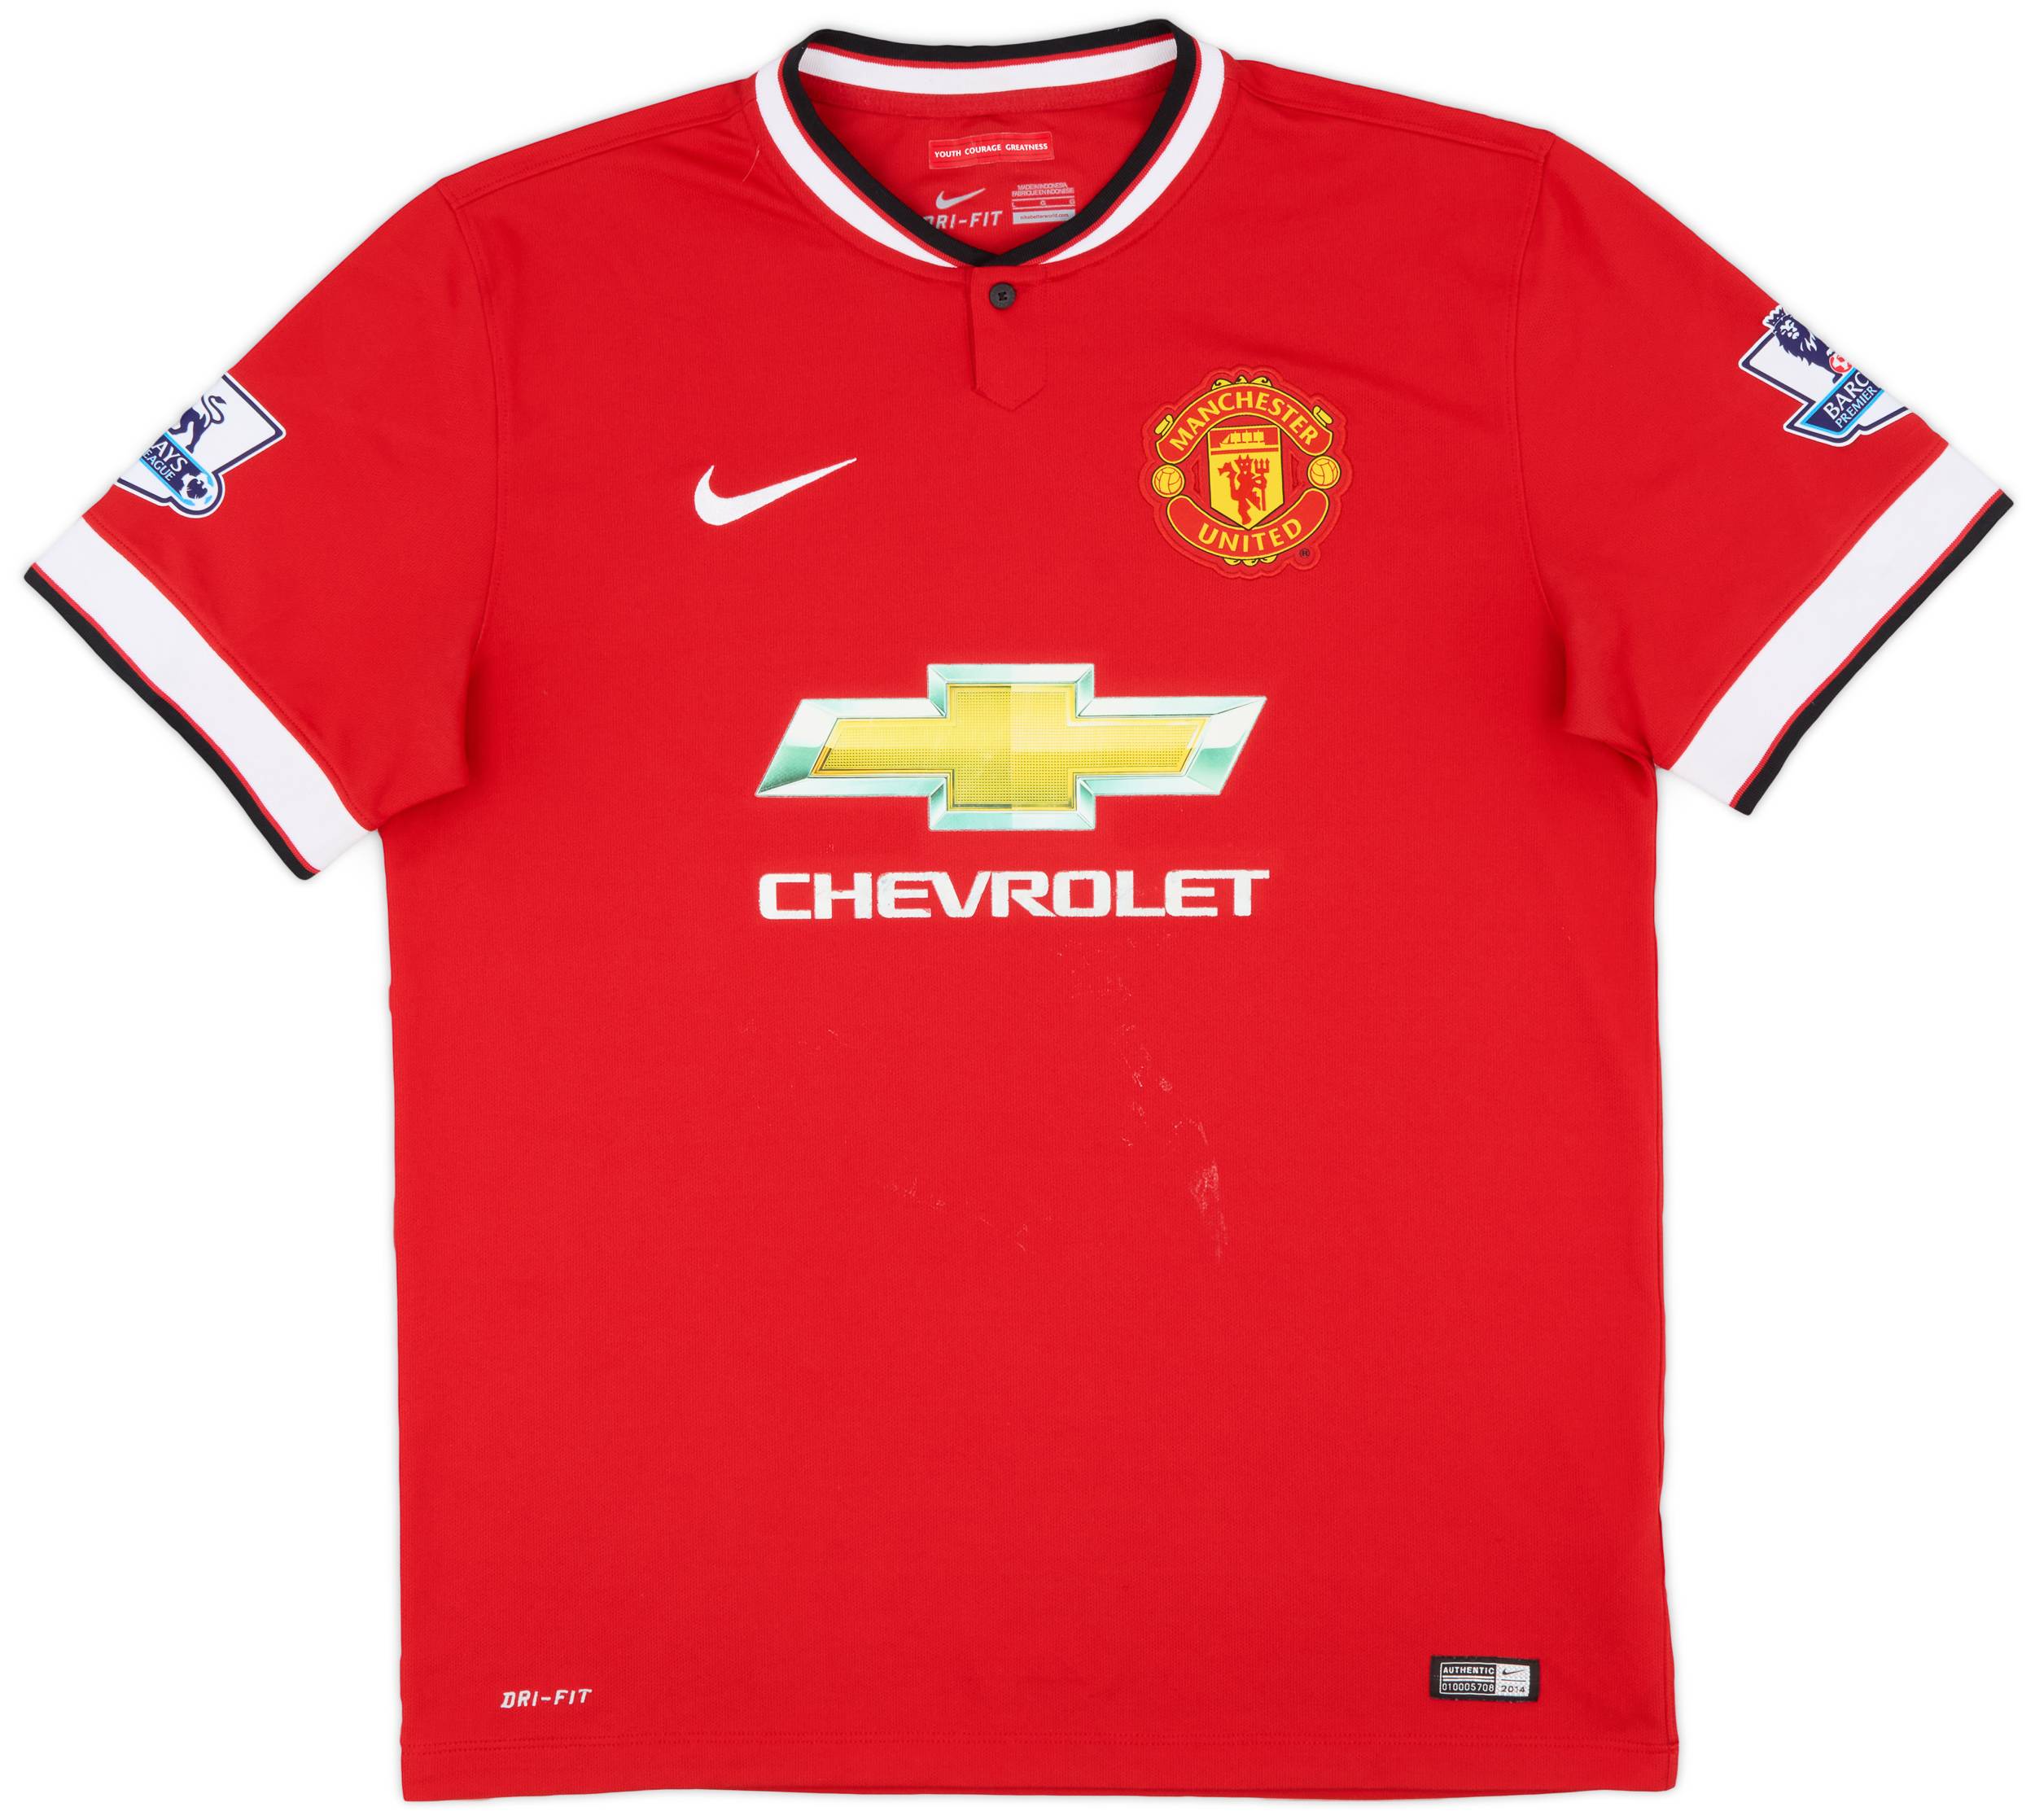 2014-15 Manchester United Home Shirt - 5/10 - (L)